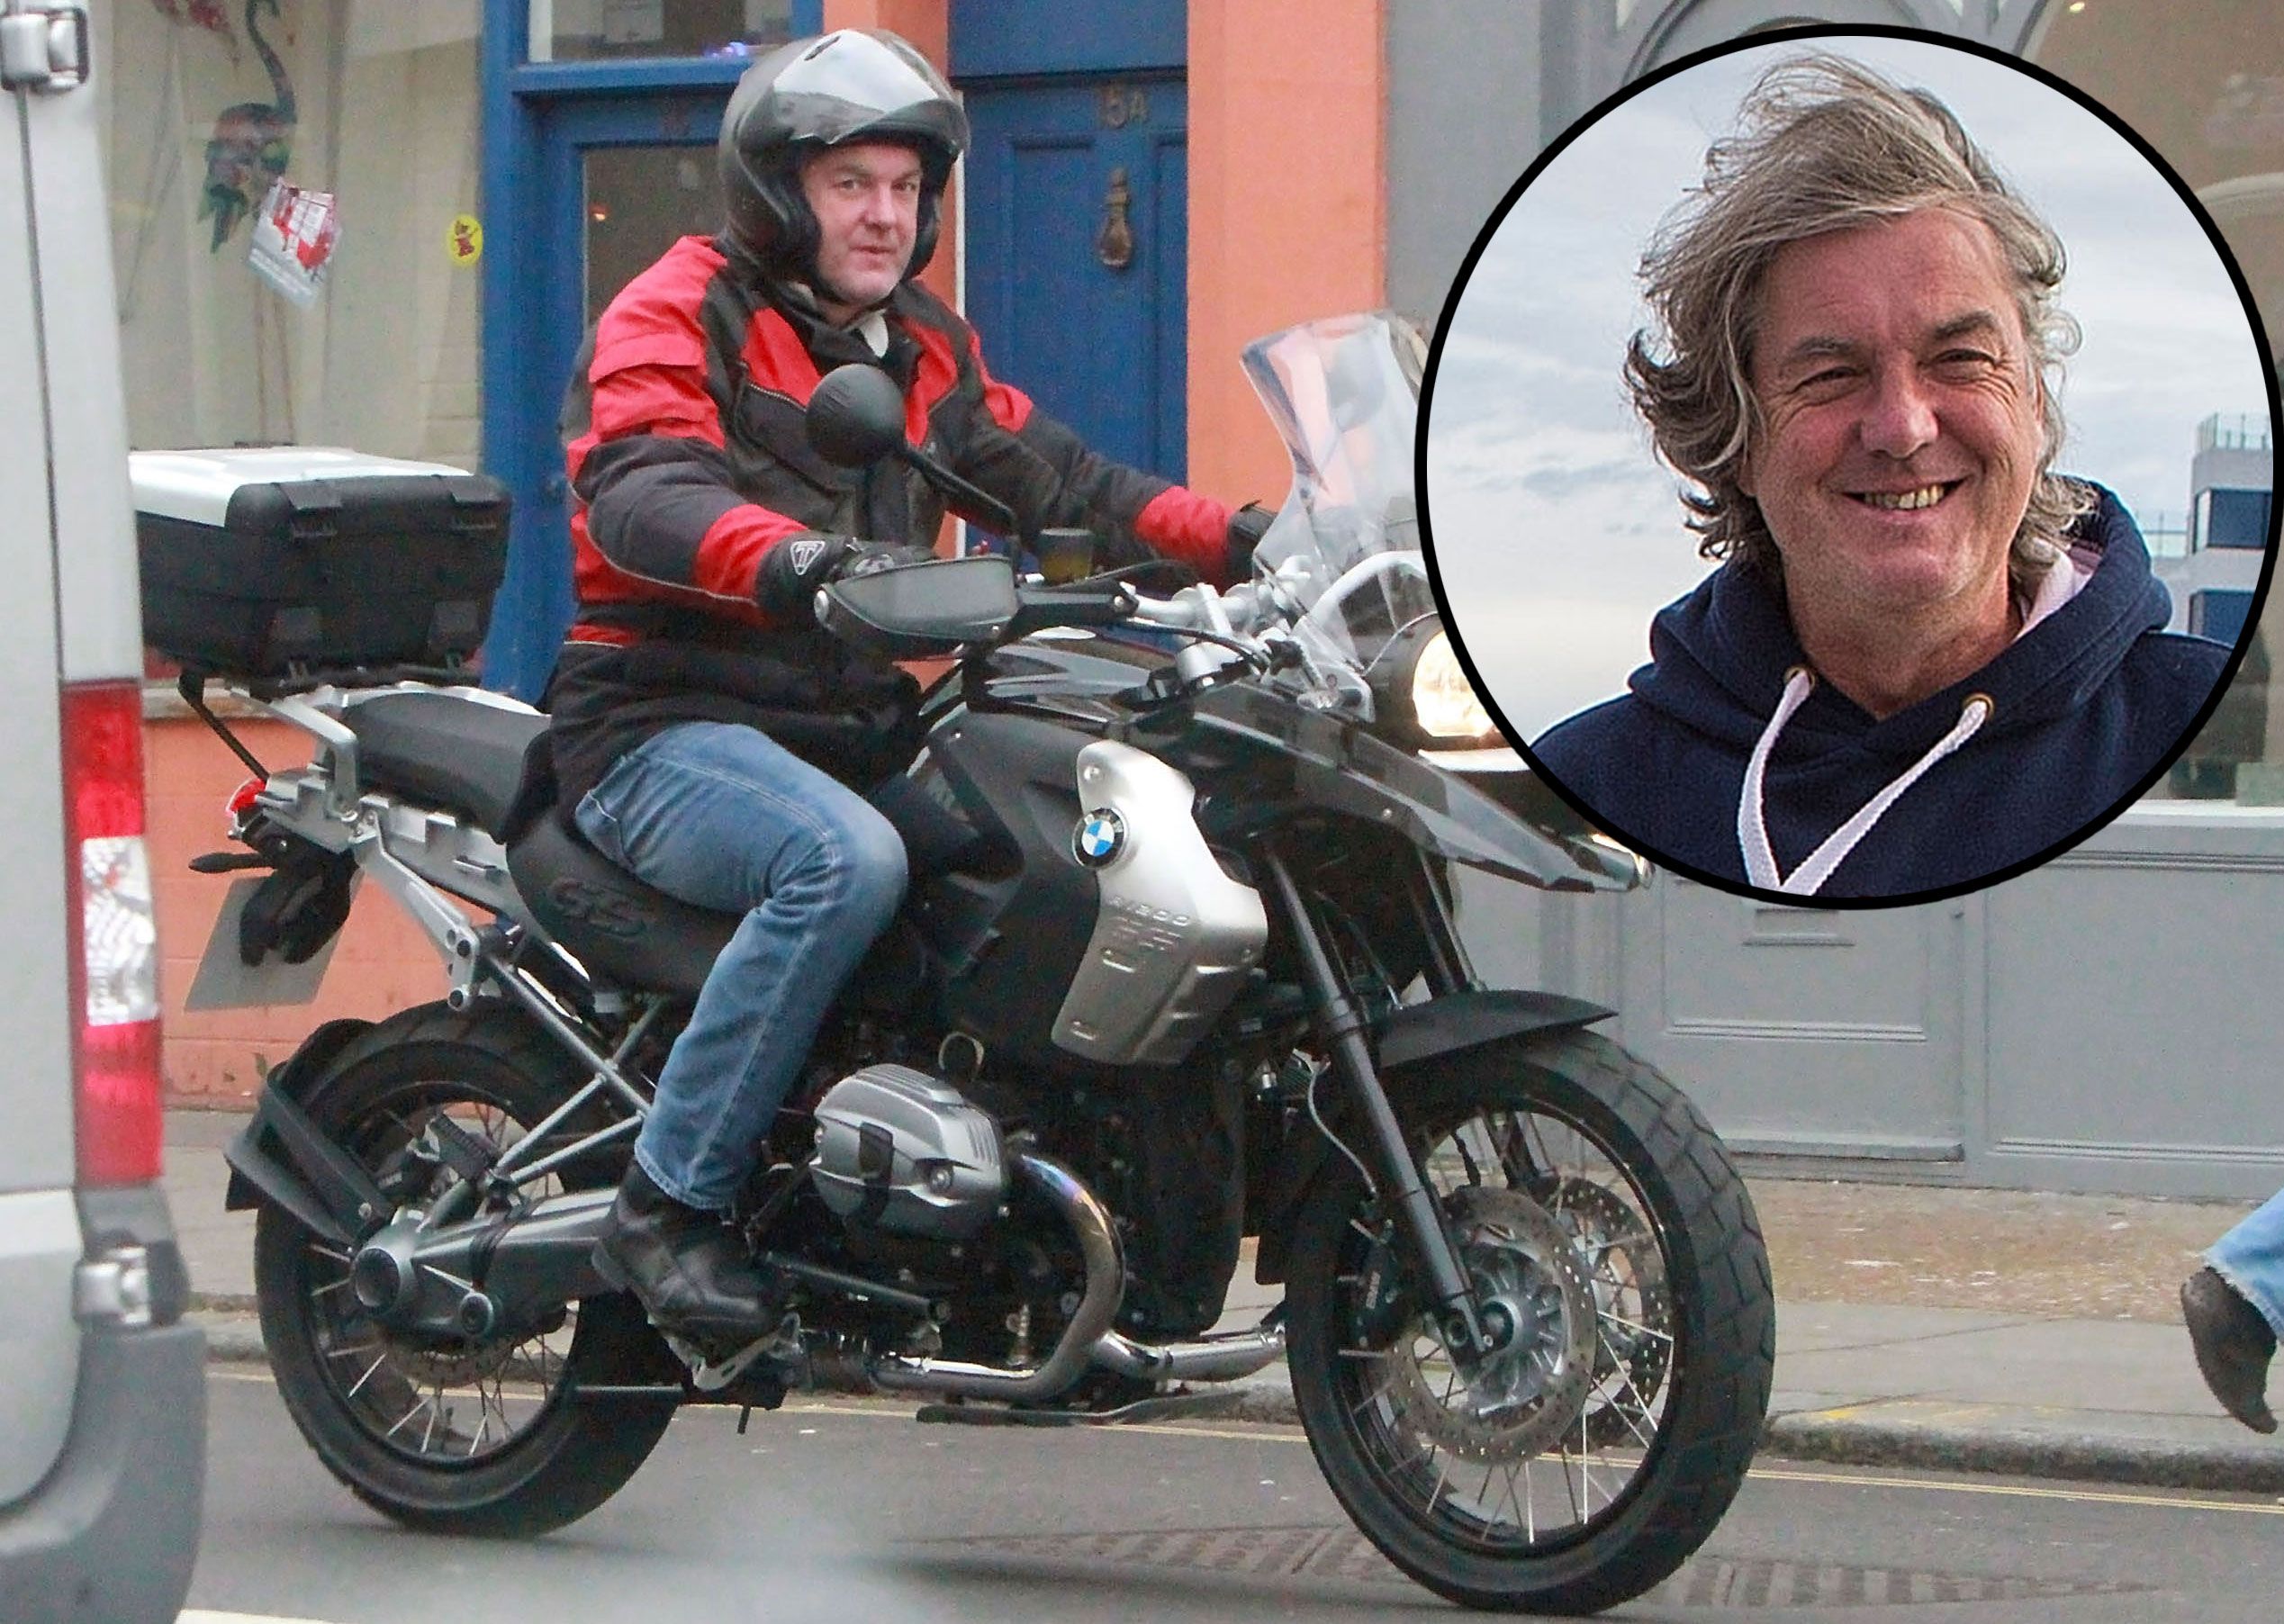 45++ Astonishing James may motorcycle model ideas in 2021 